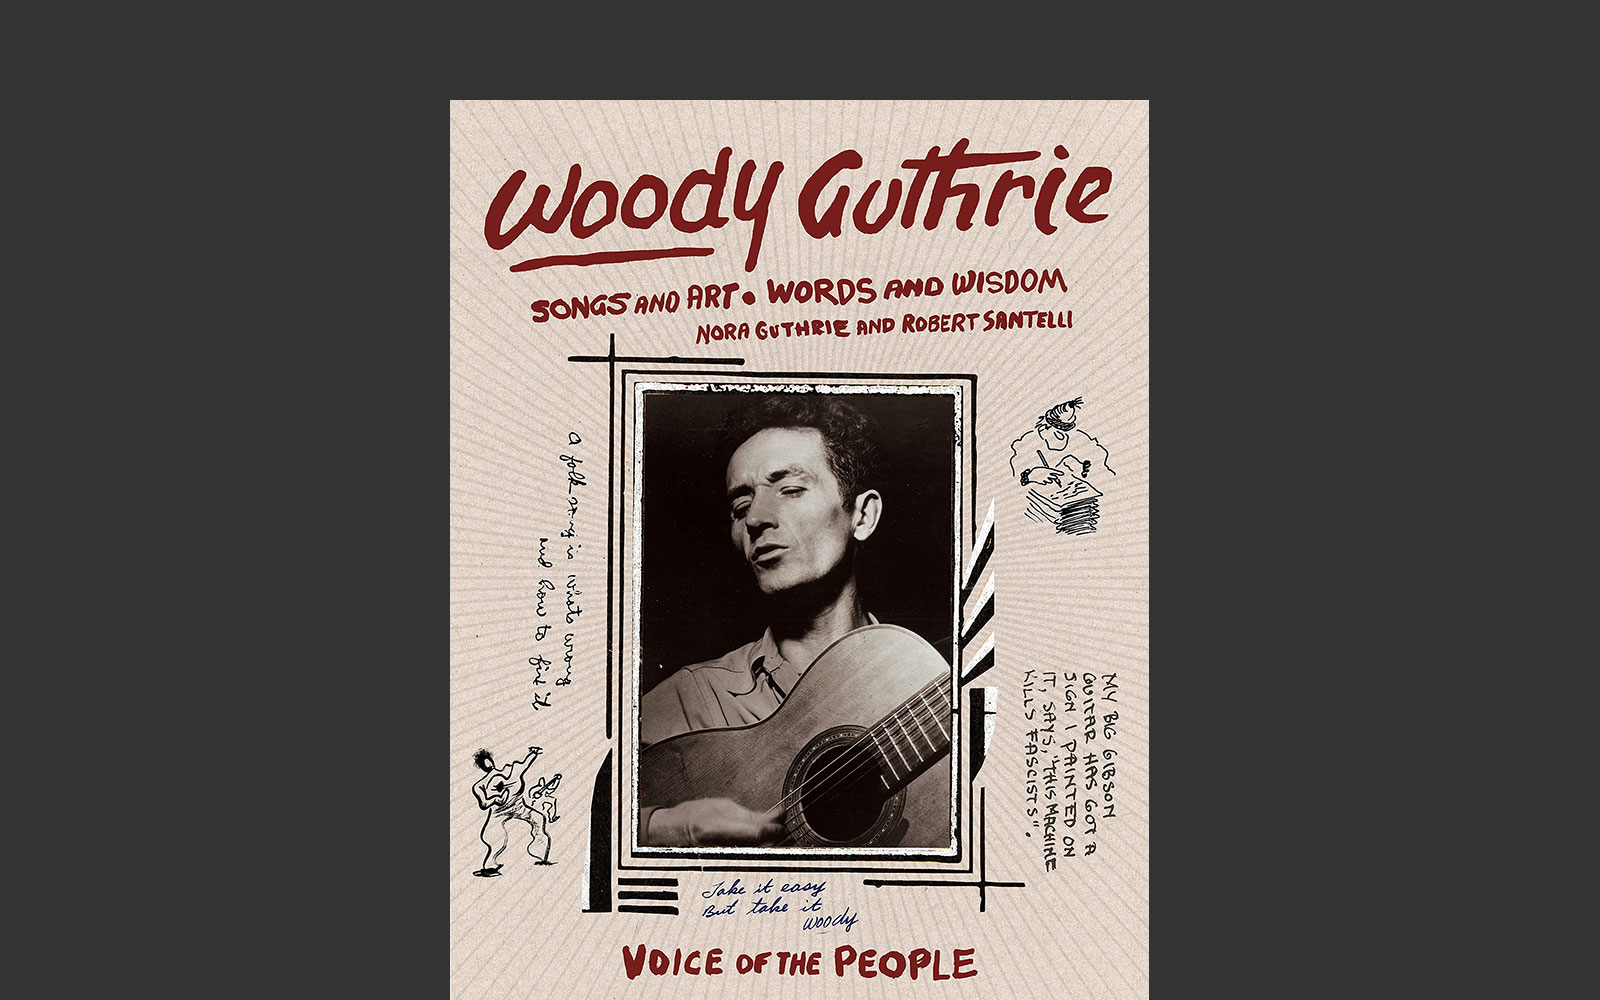 Book cover with blakc and white photo of Woody Guthrie holding guitar and text that syas Woody Guthrie Voice of the People.